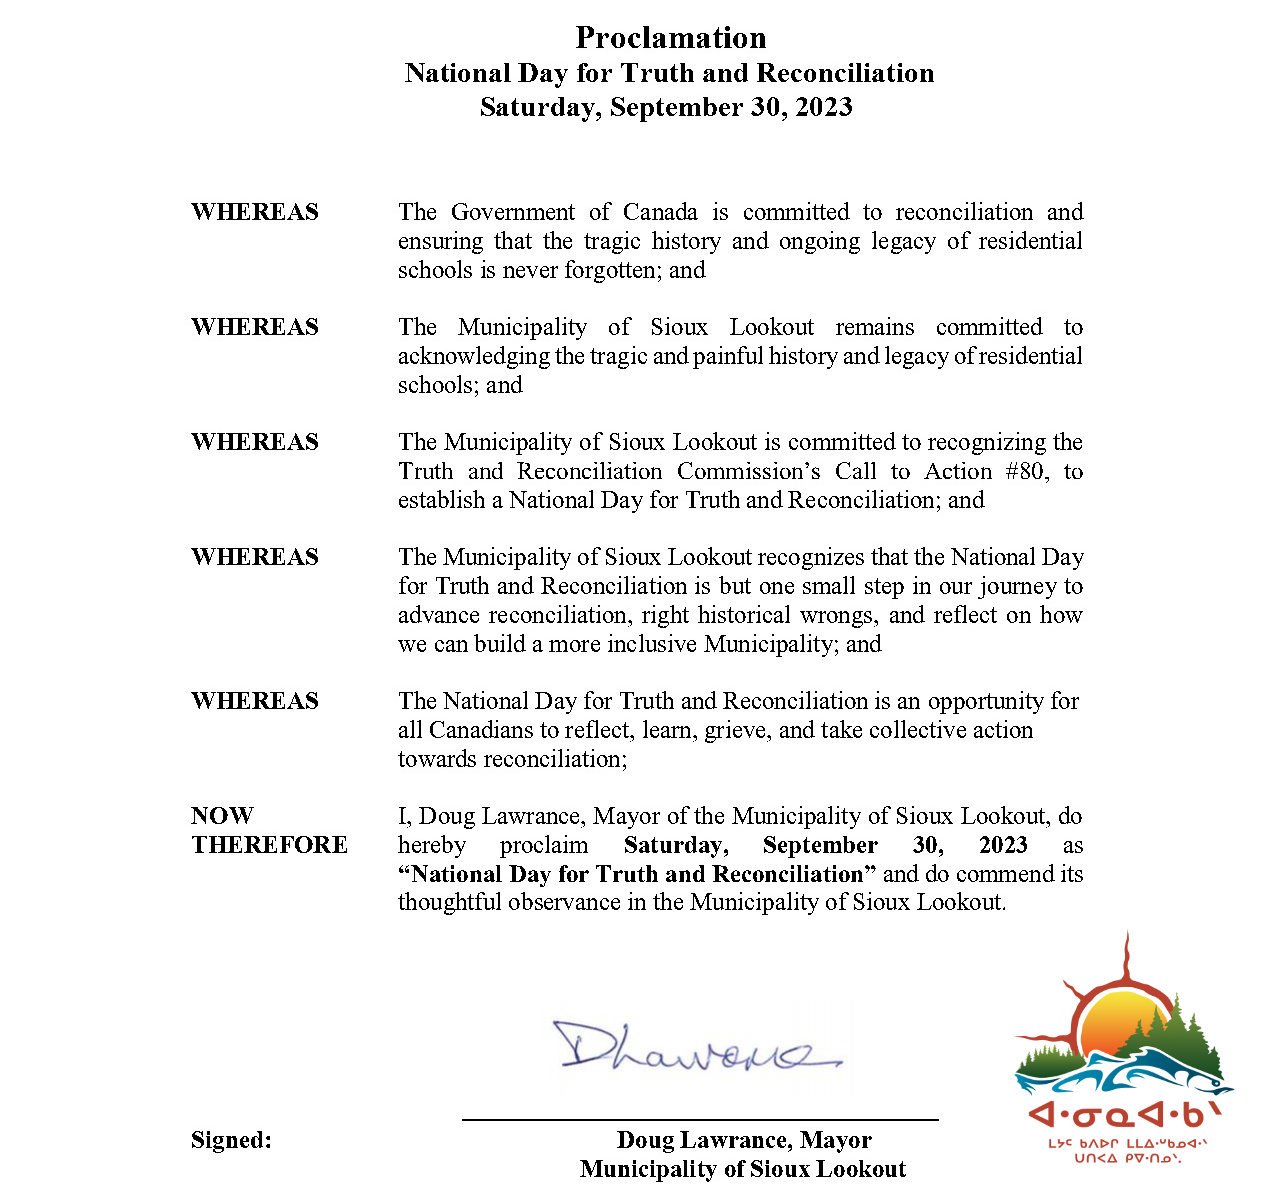 Proclamation - National Day for Truth and Reconciliation